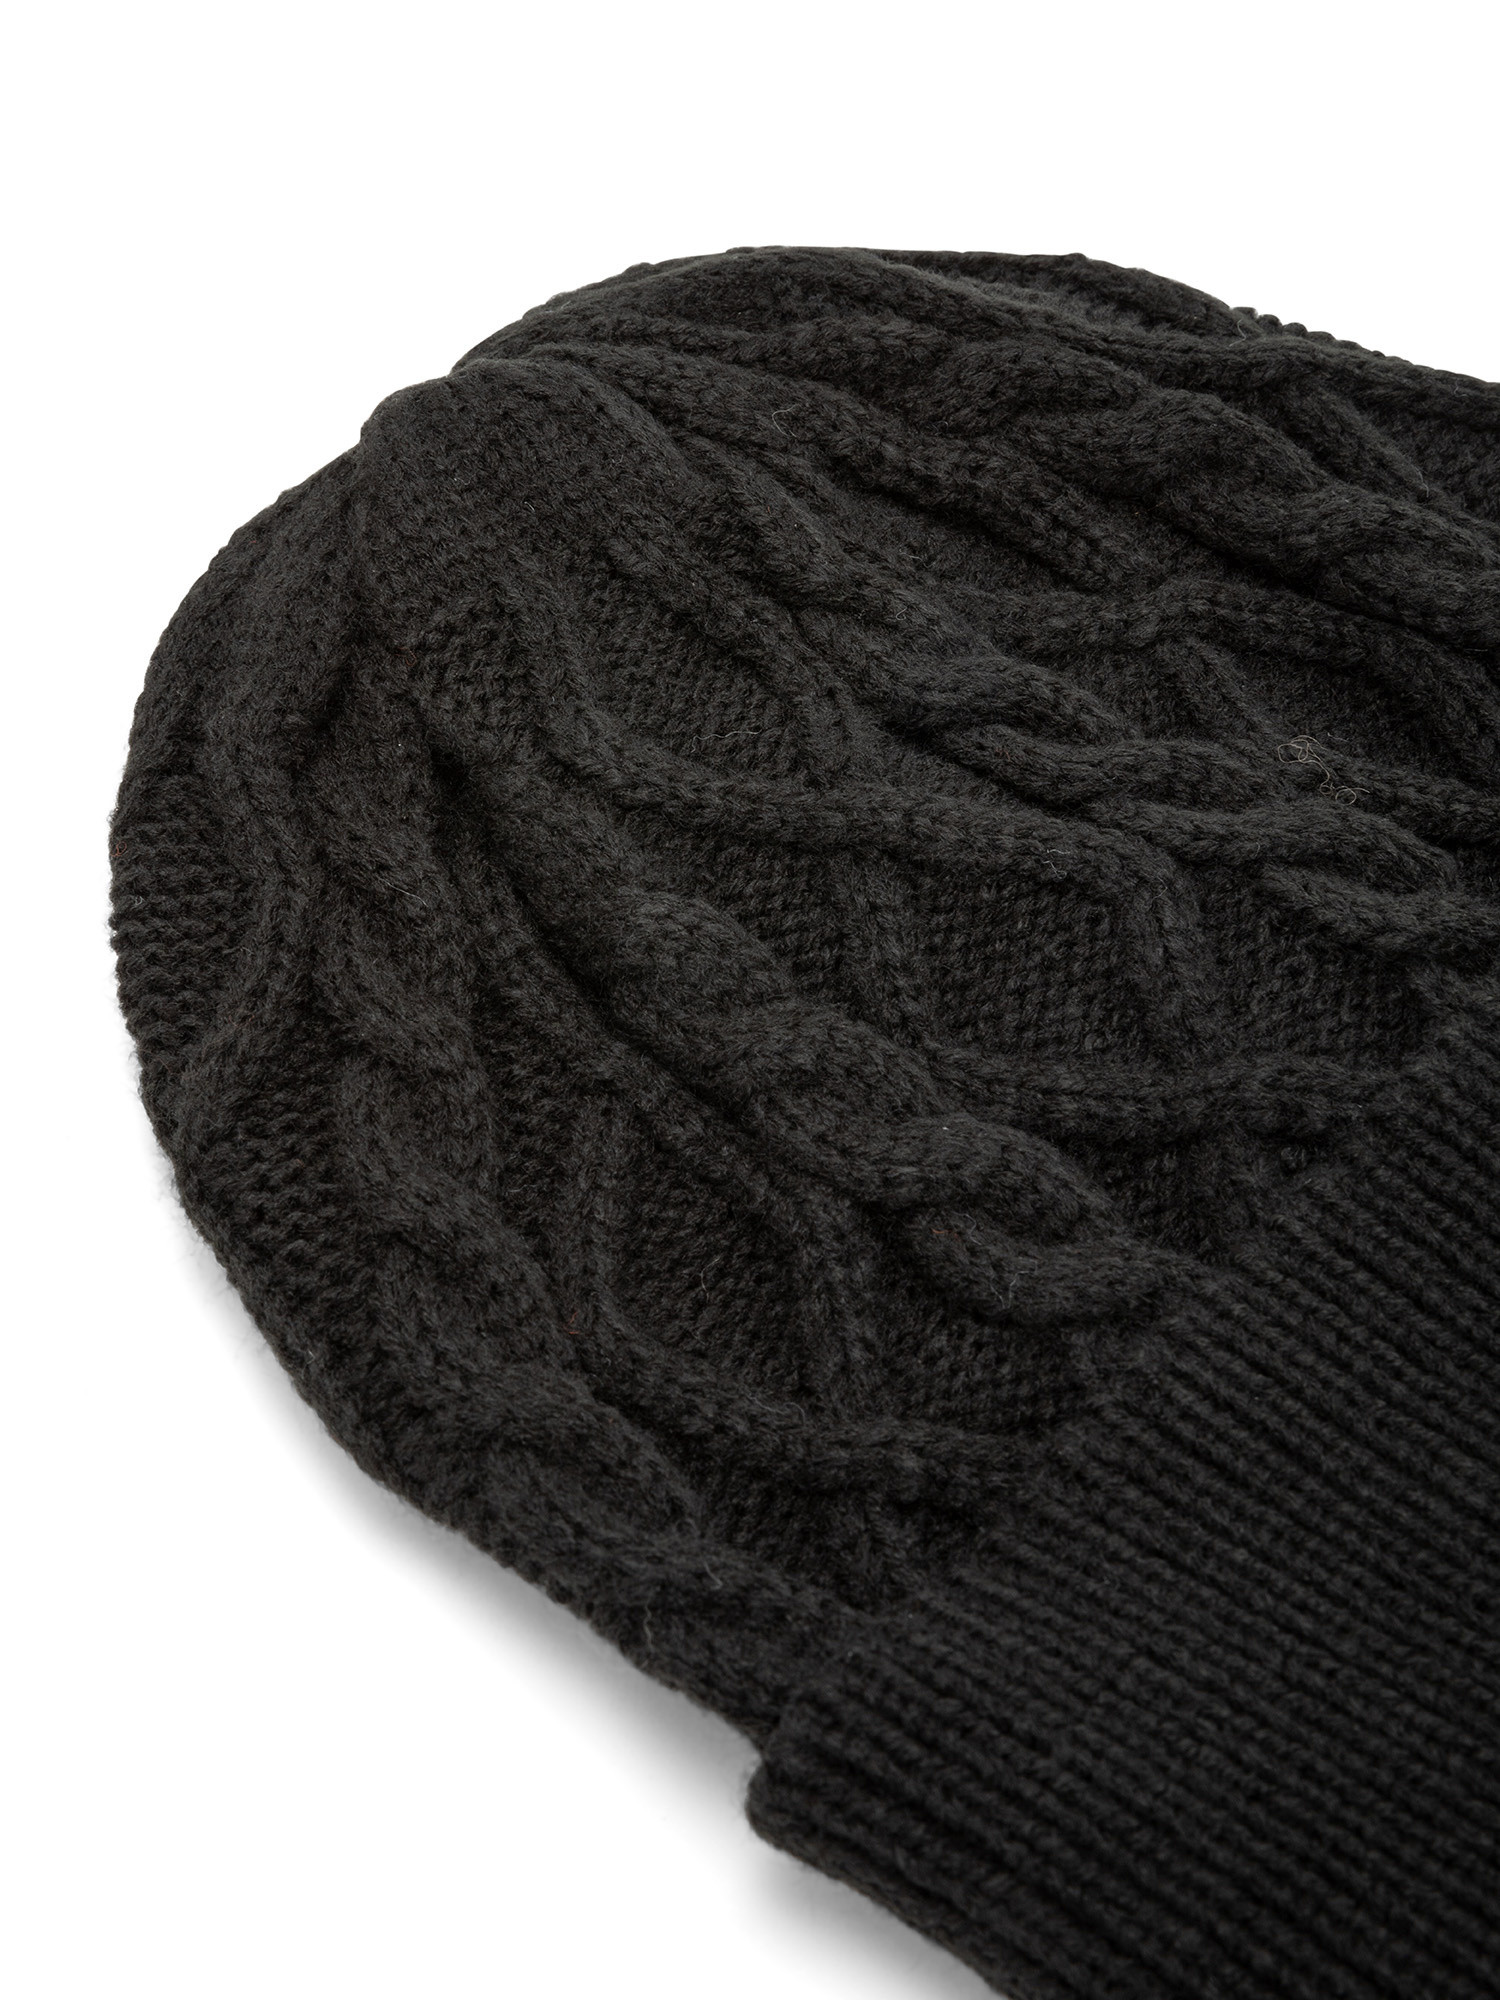 Luca D'Altieri - Beanie with knitted pattern, Black, large image number 1